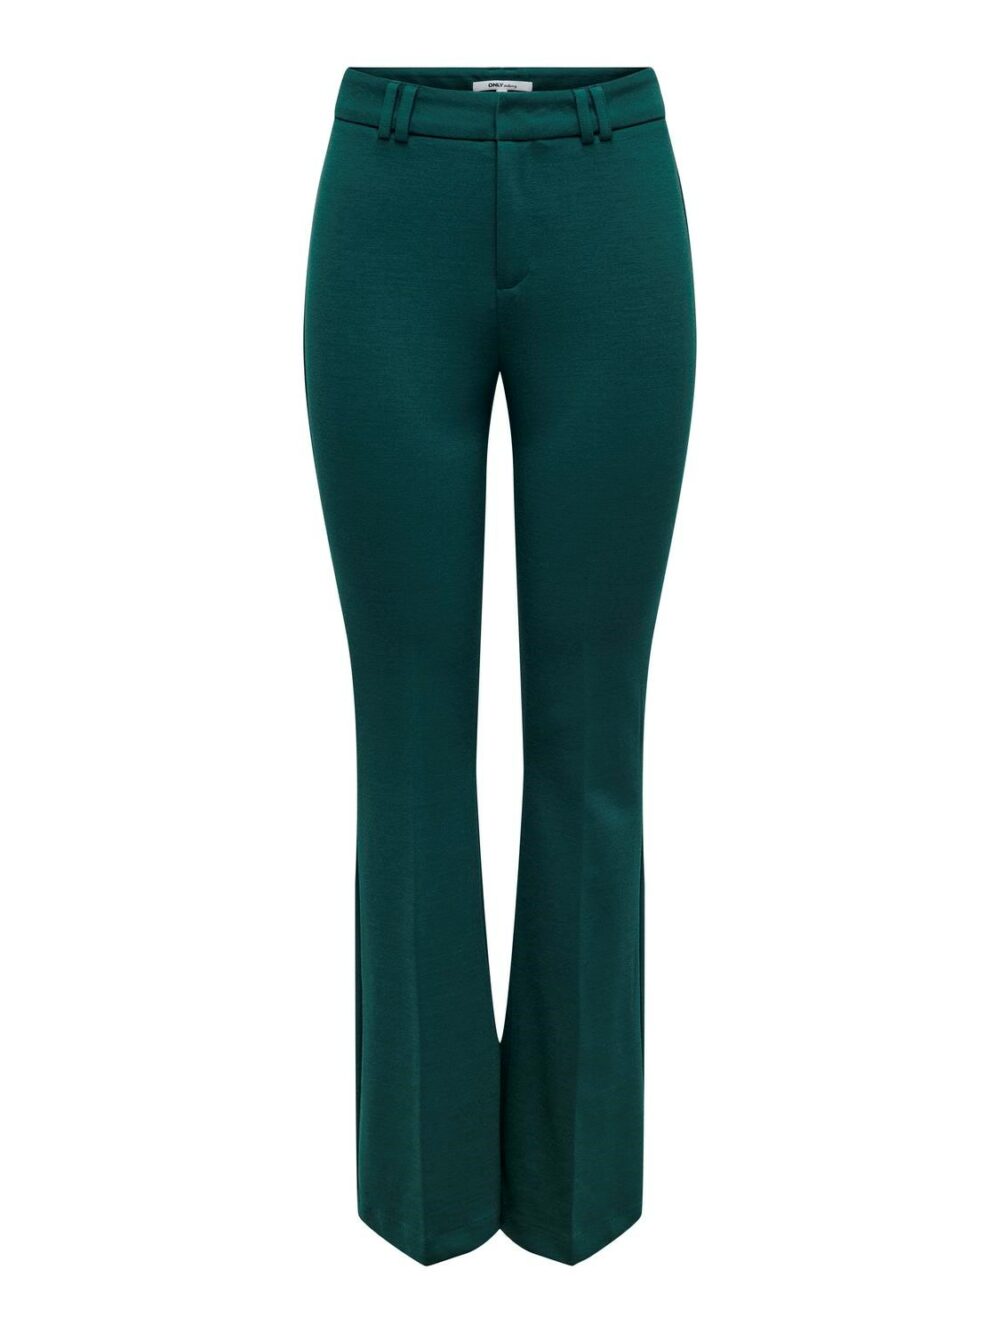 Pantaloni a sigaretta Only onlpeach mw flared pant tlr noos Verde - Foto 5